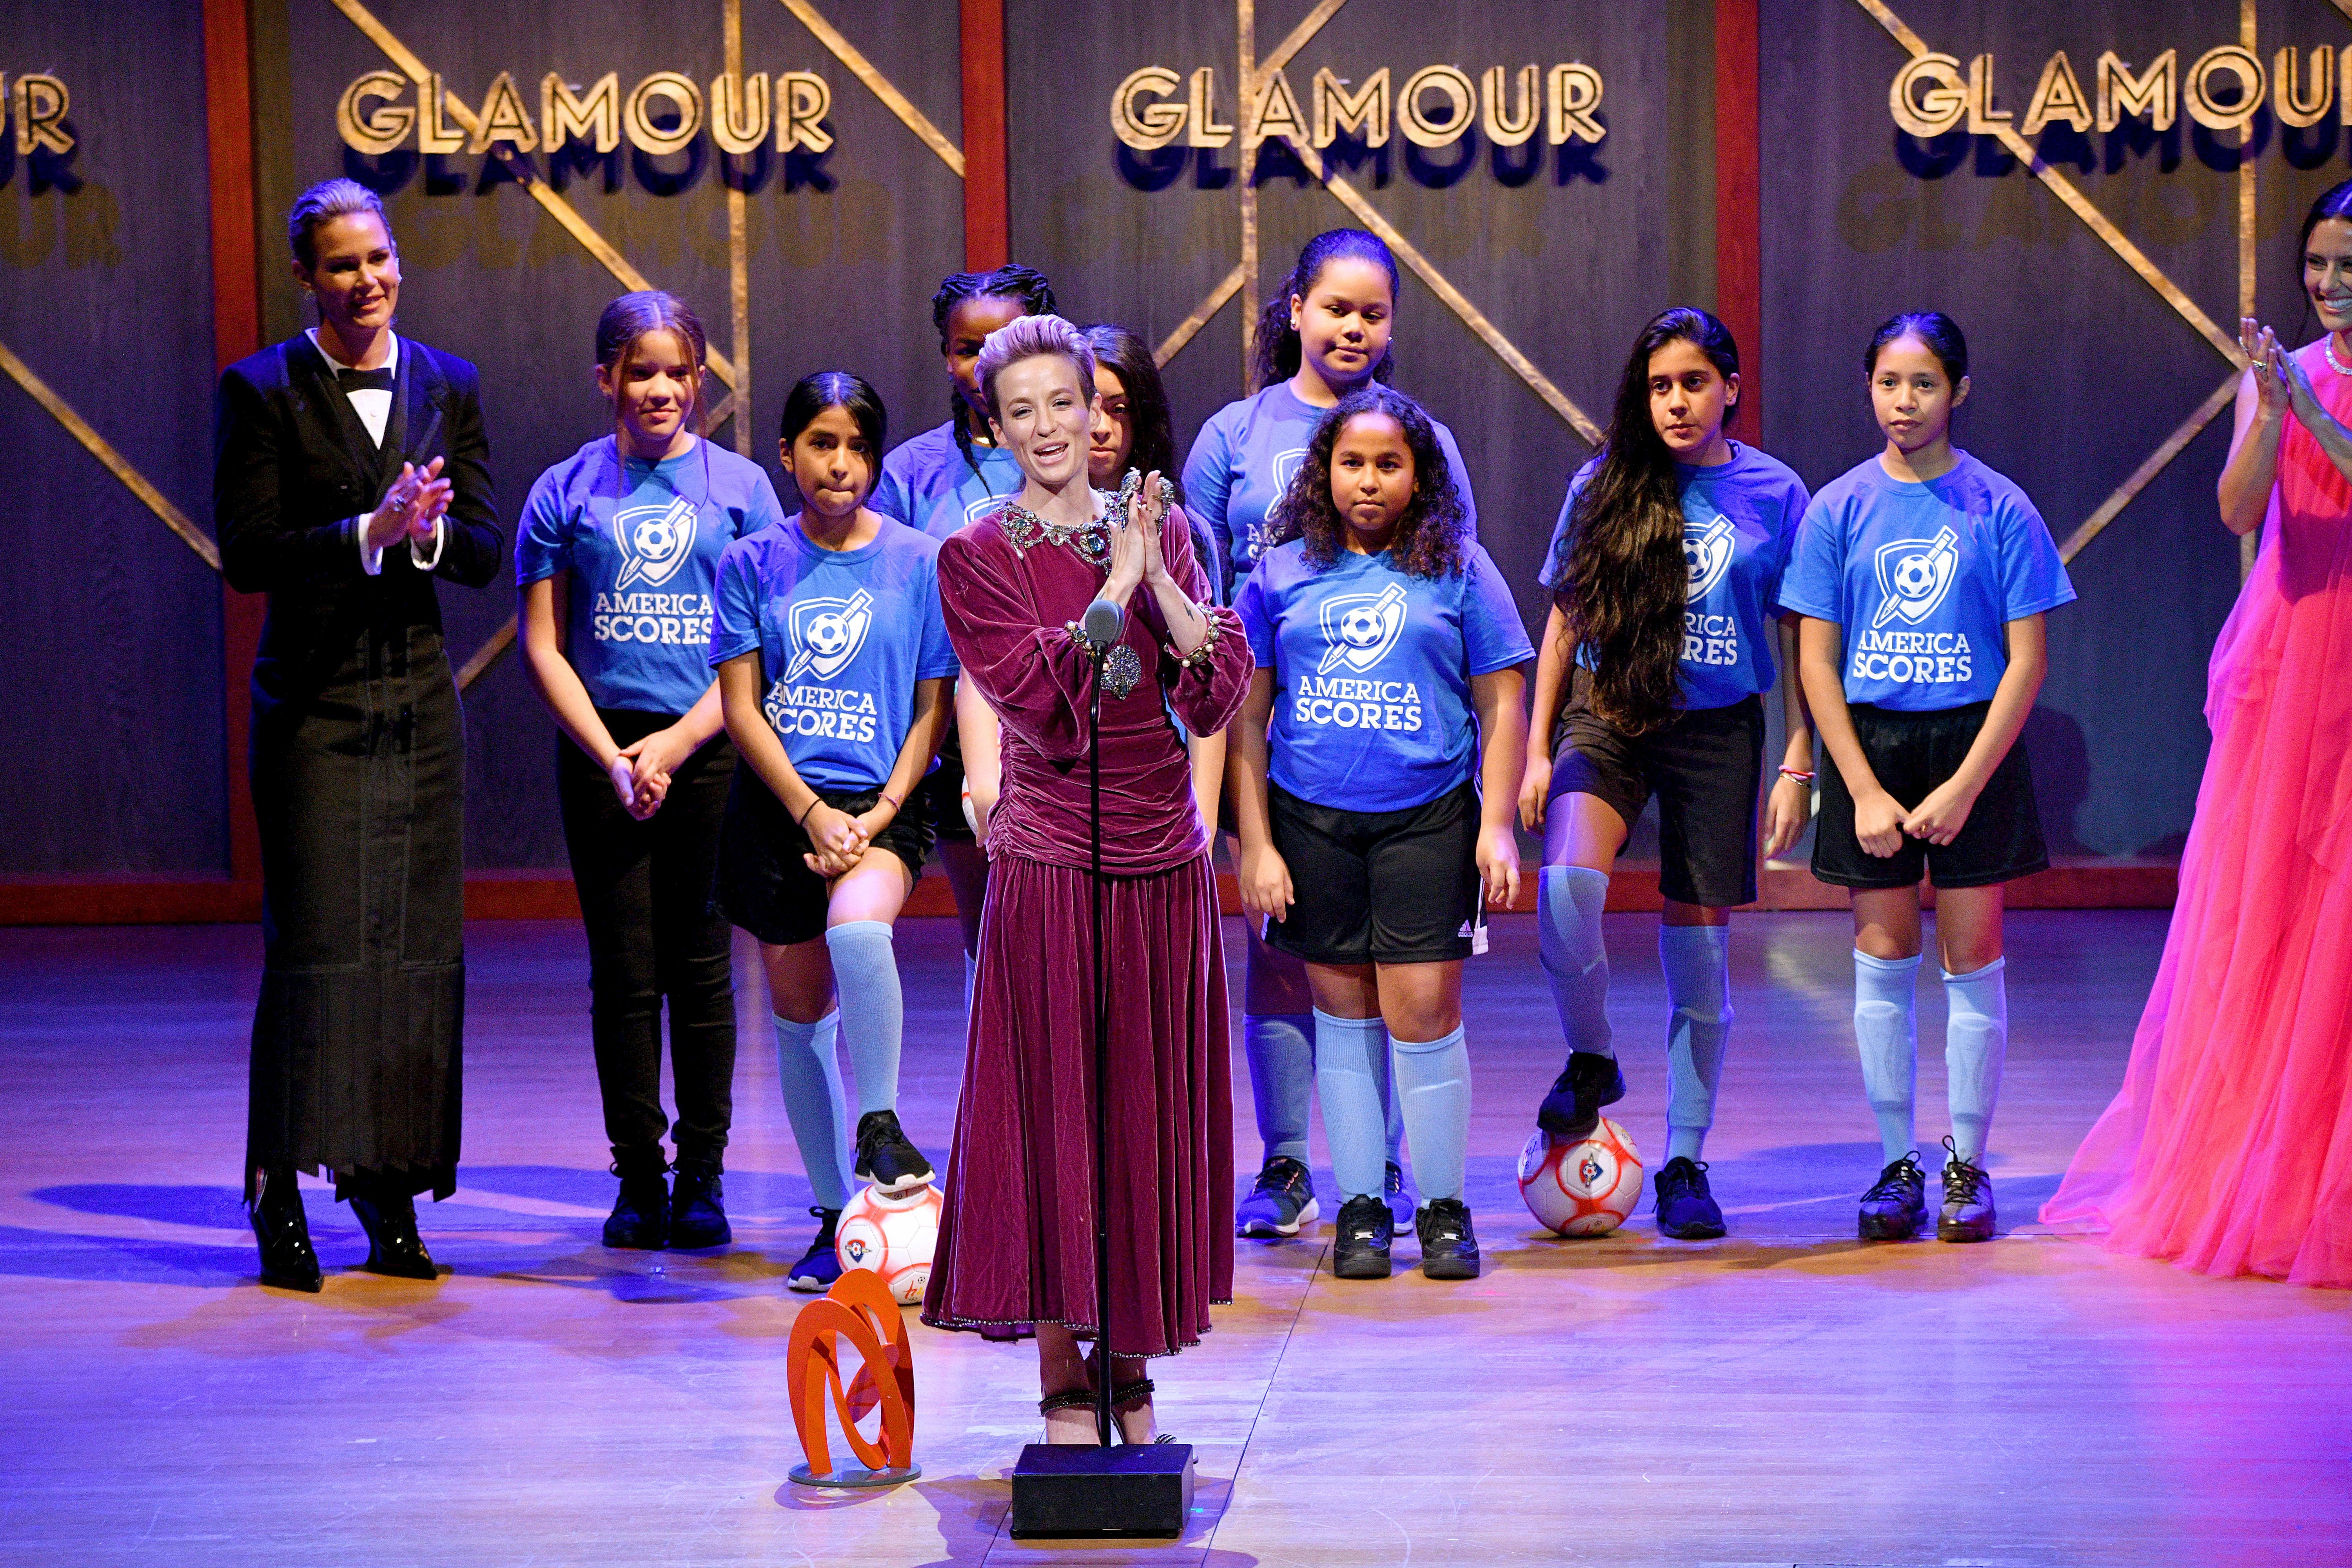 Megan Rapinoe speaks onstage alongside the Mott Hall Girls soccer team at the 2019 Glamour Women Of The Year Awards at Alice Tully Hall on November 11, 2019, in New York City. | Source: Getty Images.